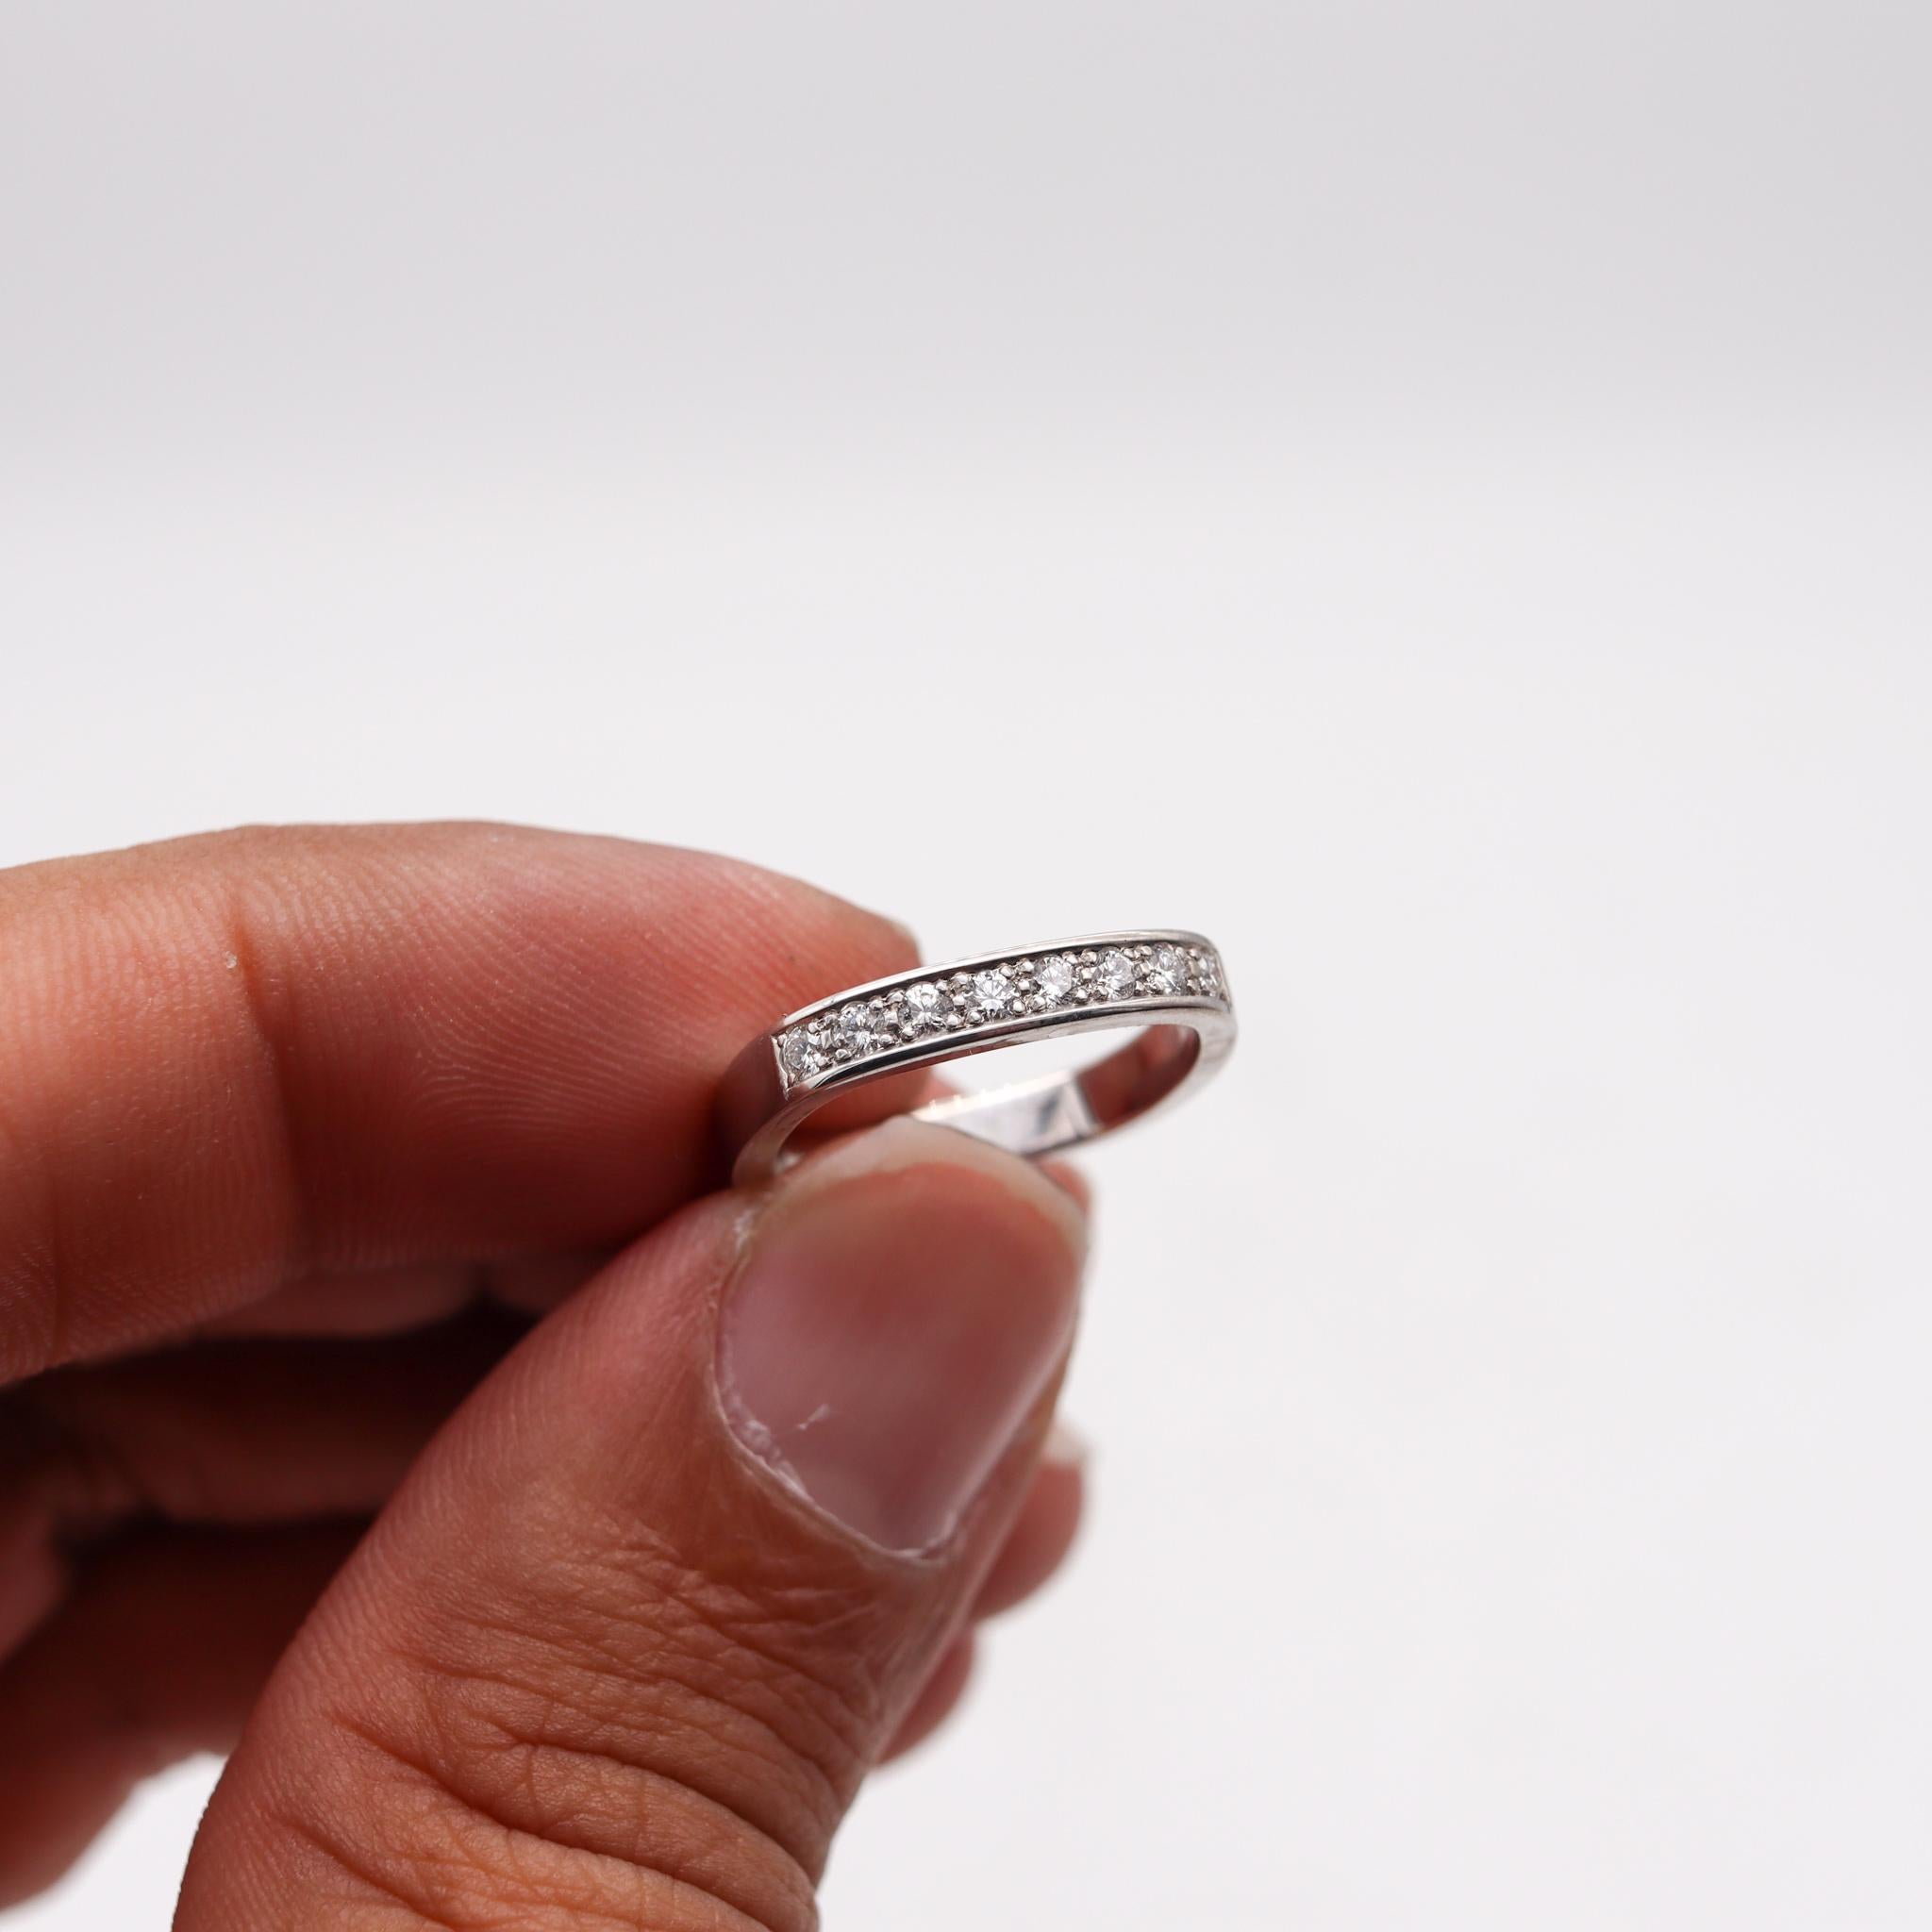 Paul Binder 1970 Swiss Square Eternity Ring In 18Kt white Gold With VS Diamonds For Sale 1